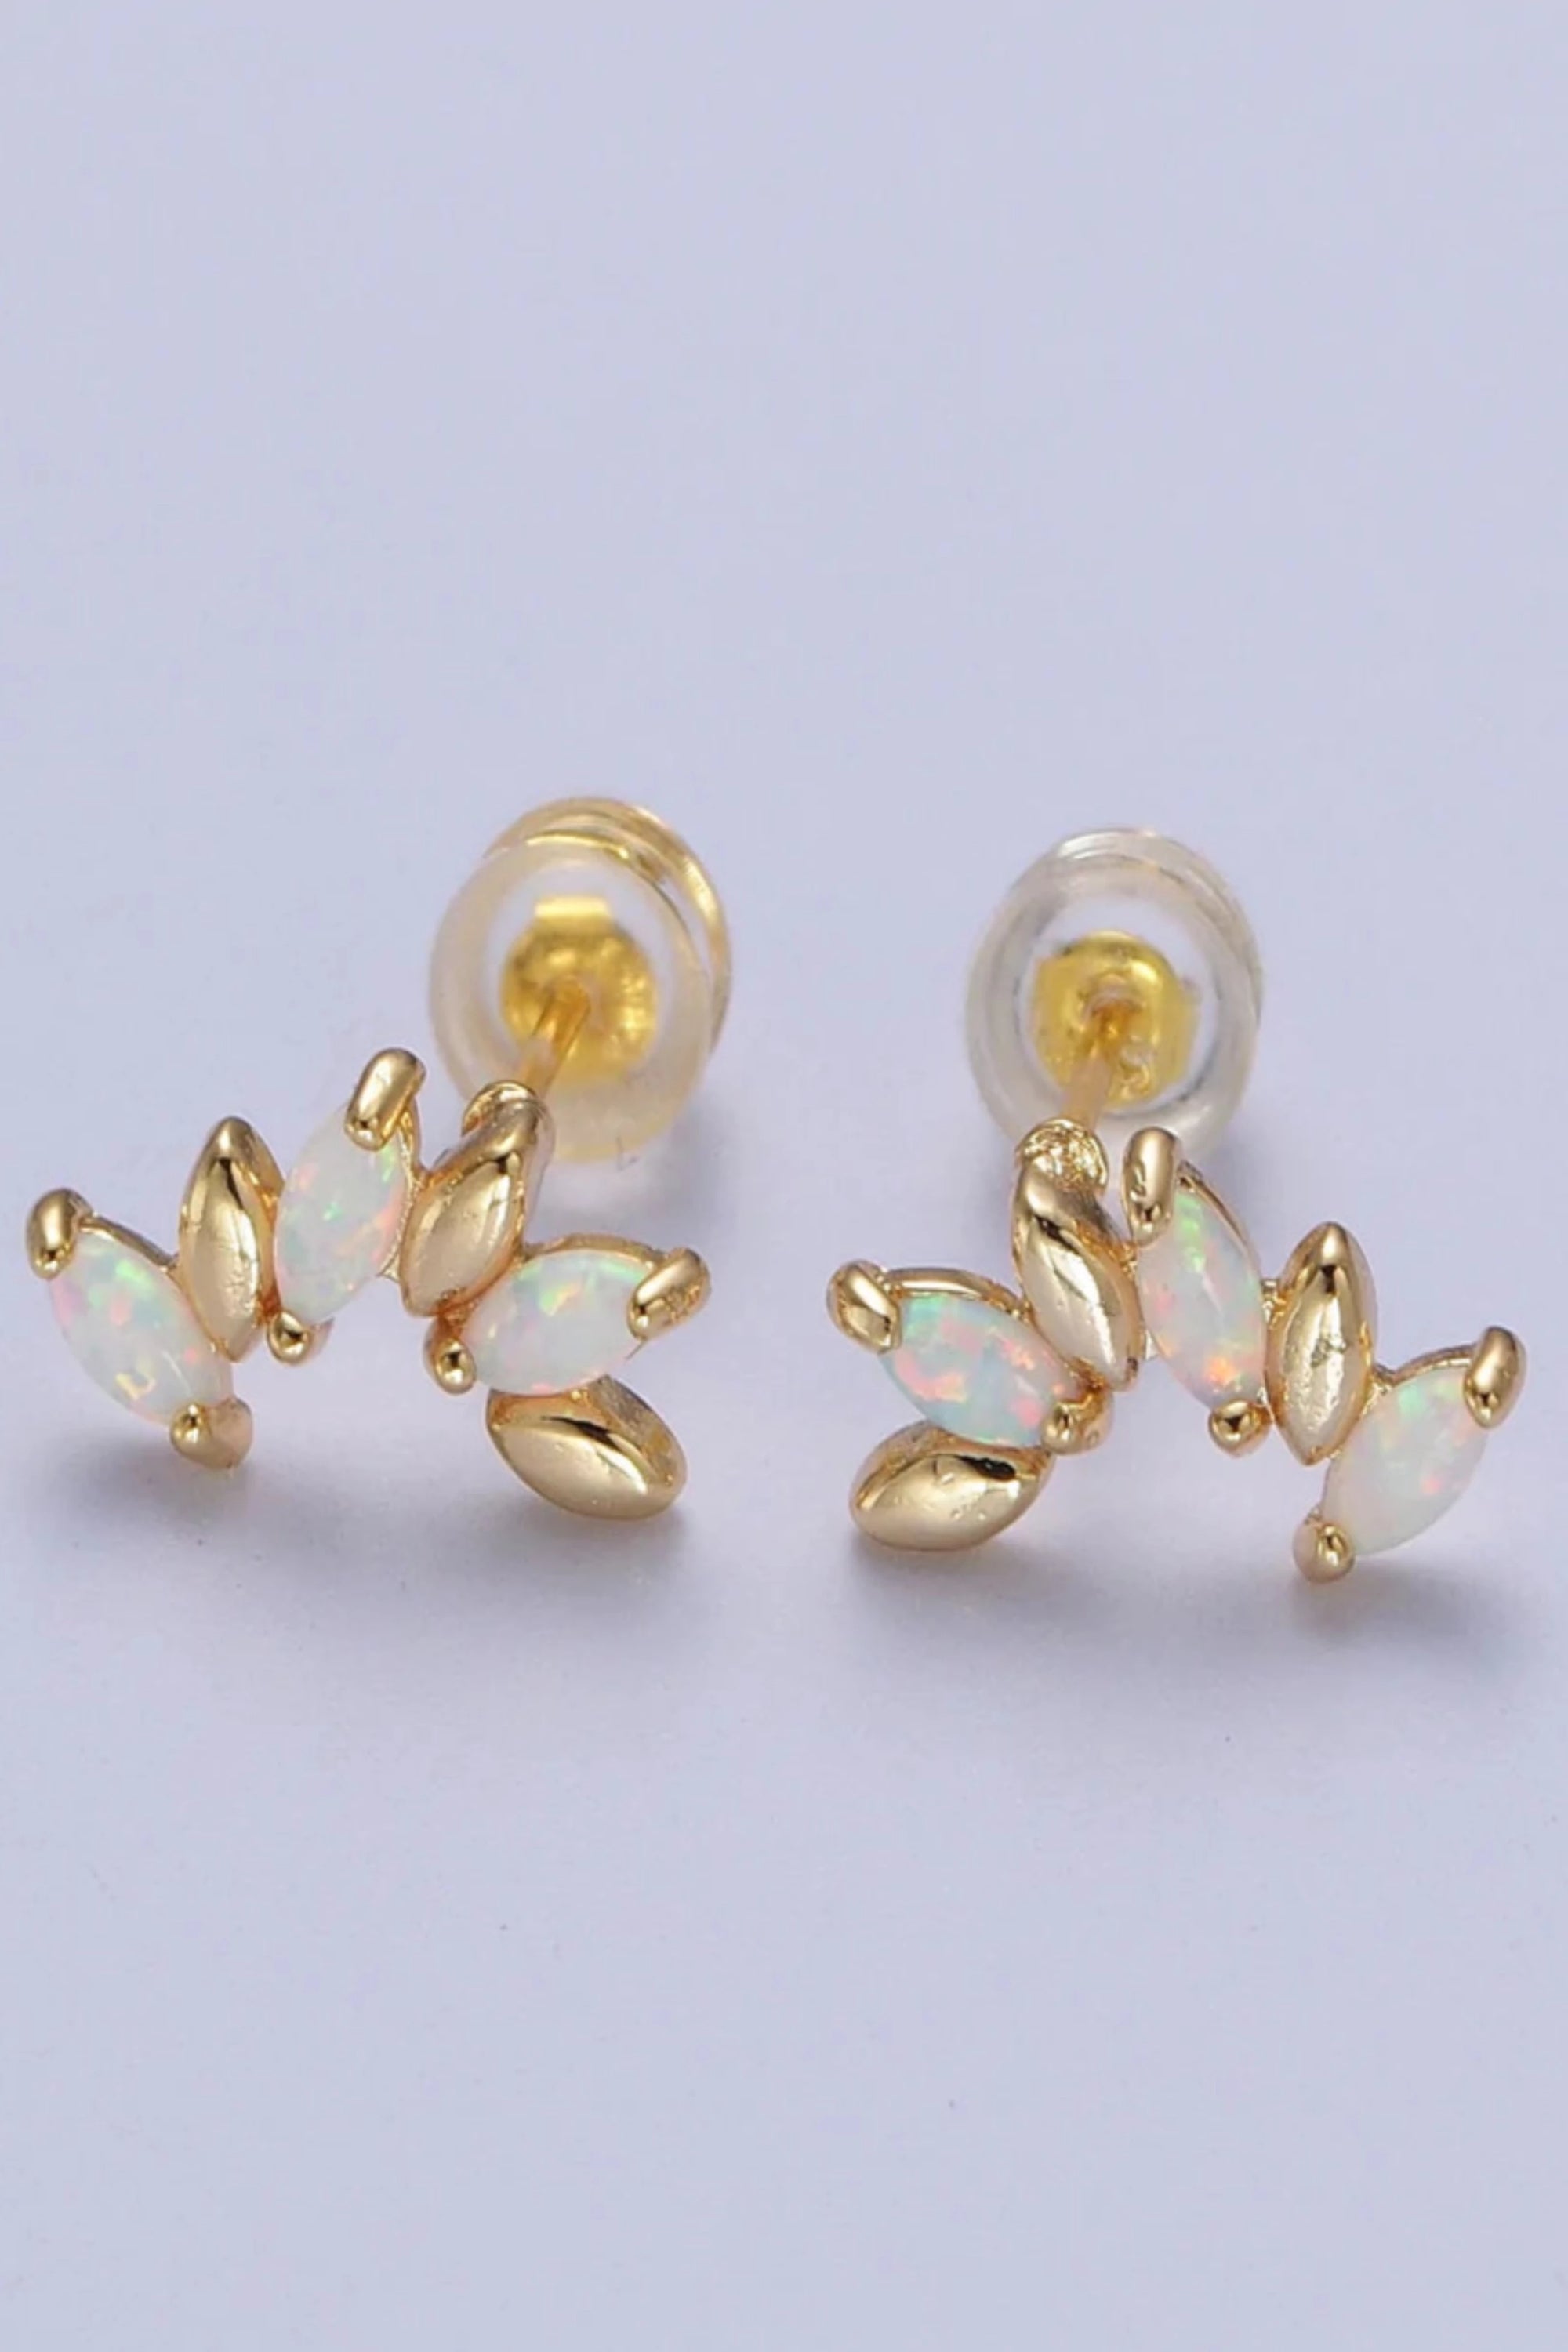 "Gold filled marquise patterned studs with alternating gold and opal marquise shapes."